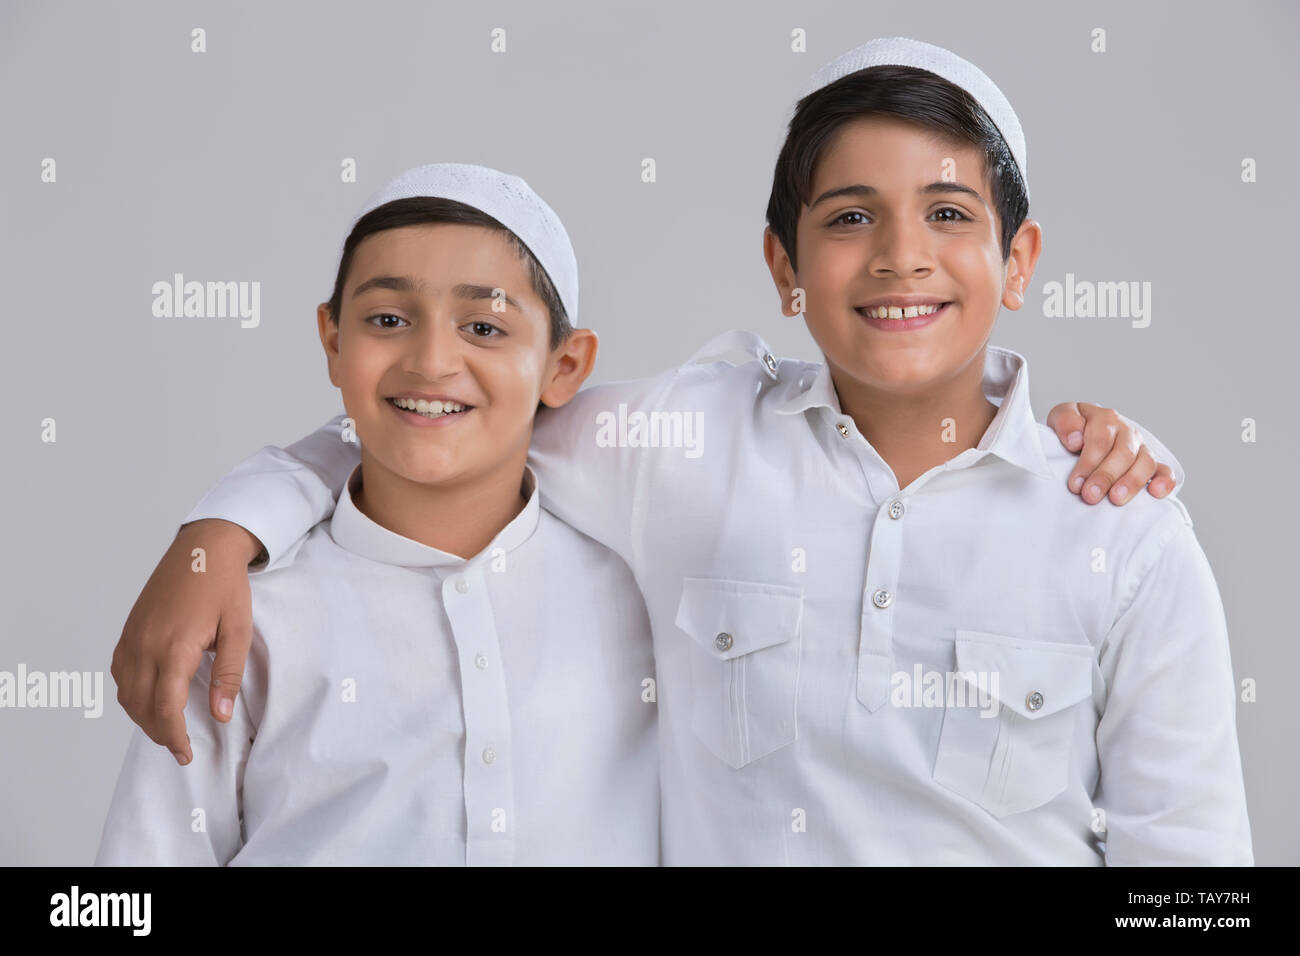 Young Muslim boys with caps smiling and holding each other Stock Photo